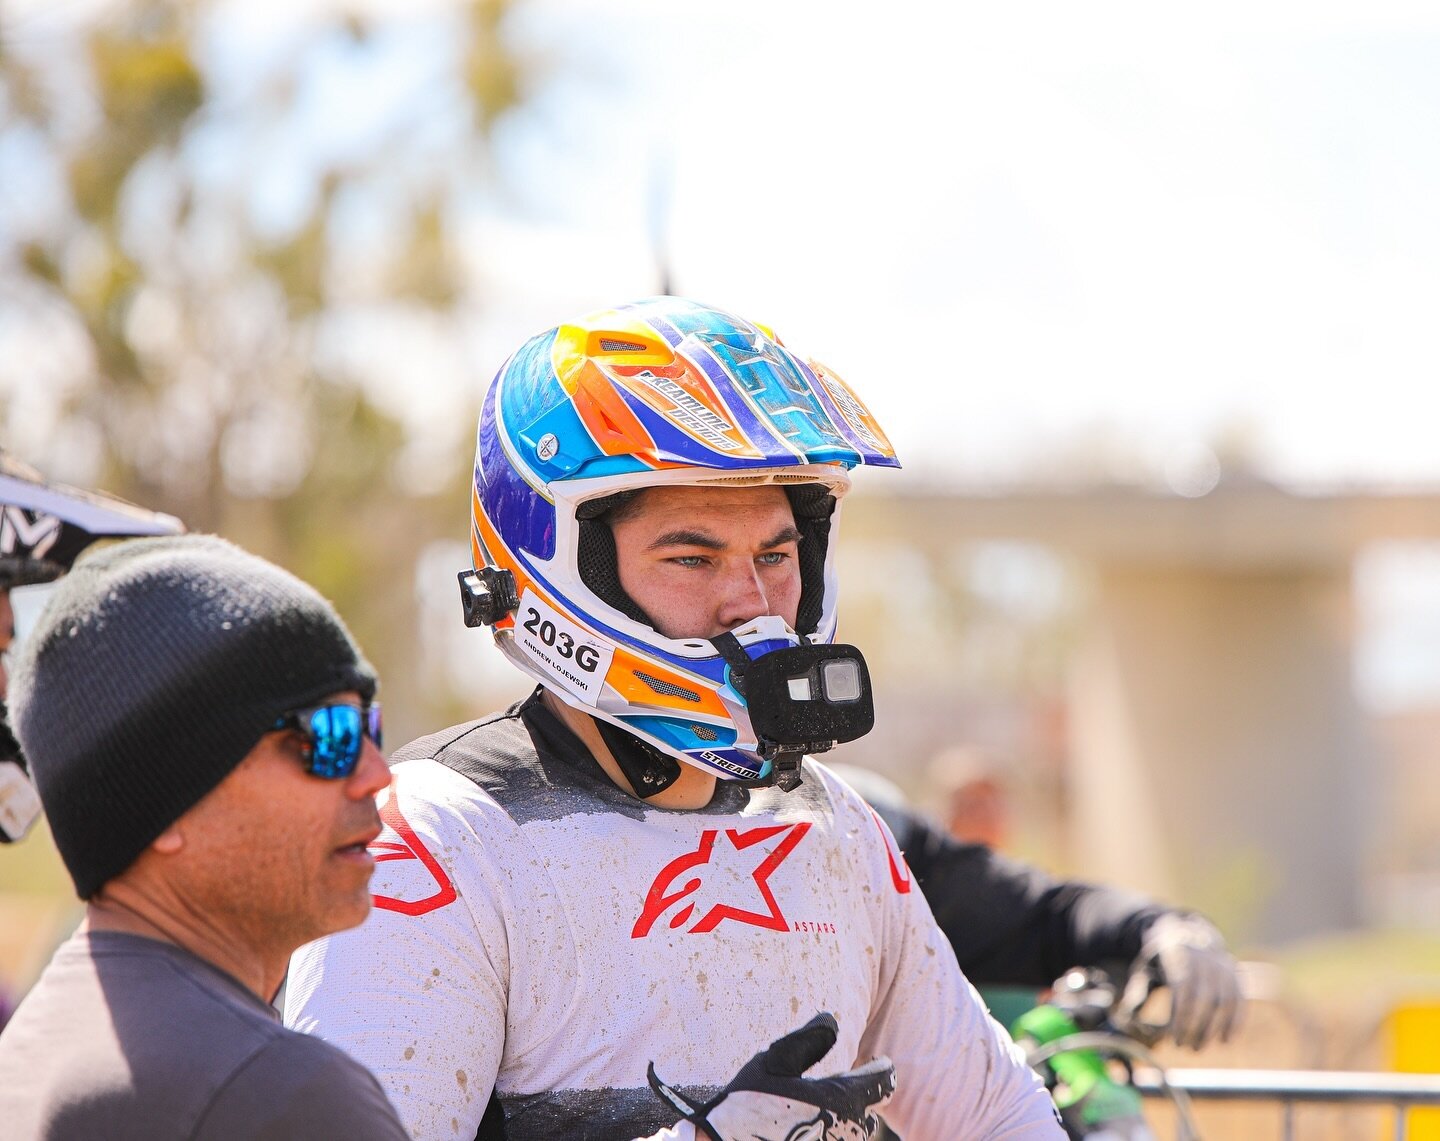 Some of my favorite photos are the pre-race ones; where everyone is focused and ready 😎 
 
 
 
#throttletherapy #motocross #supercross#BraapLife #MotocrossAdventures  #MXCrossCountry #AMAmotocross #supercrosslive #TrackTherapy #MXShots  #DirtBikeCap